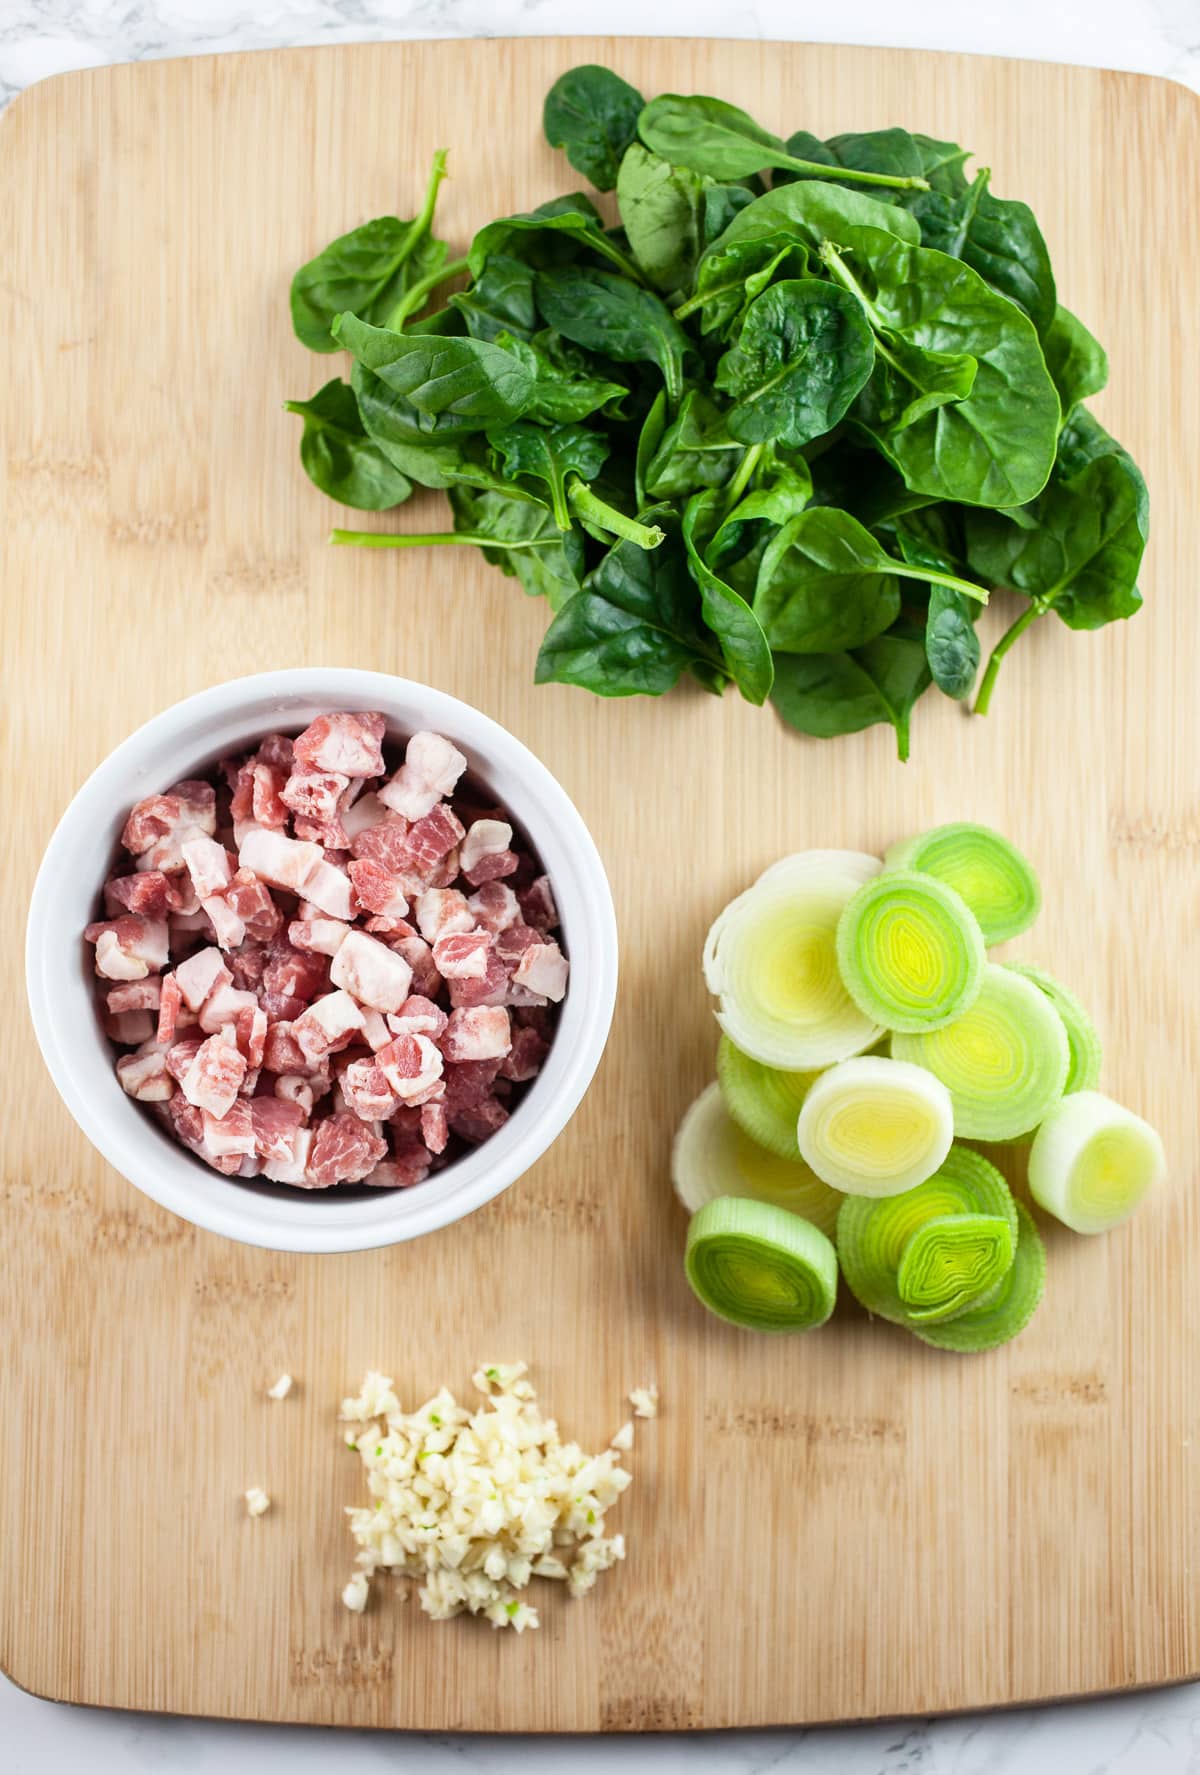 Minced garlic, sliced leeks, uncooked pancetta, and spinach on wooden cutting board.